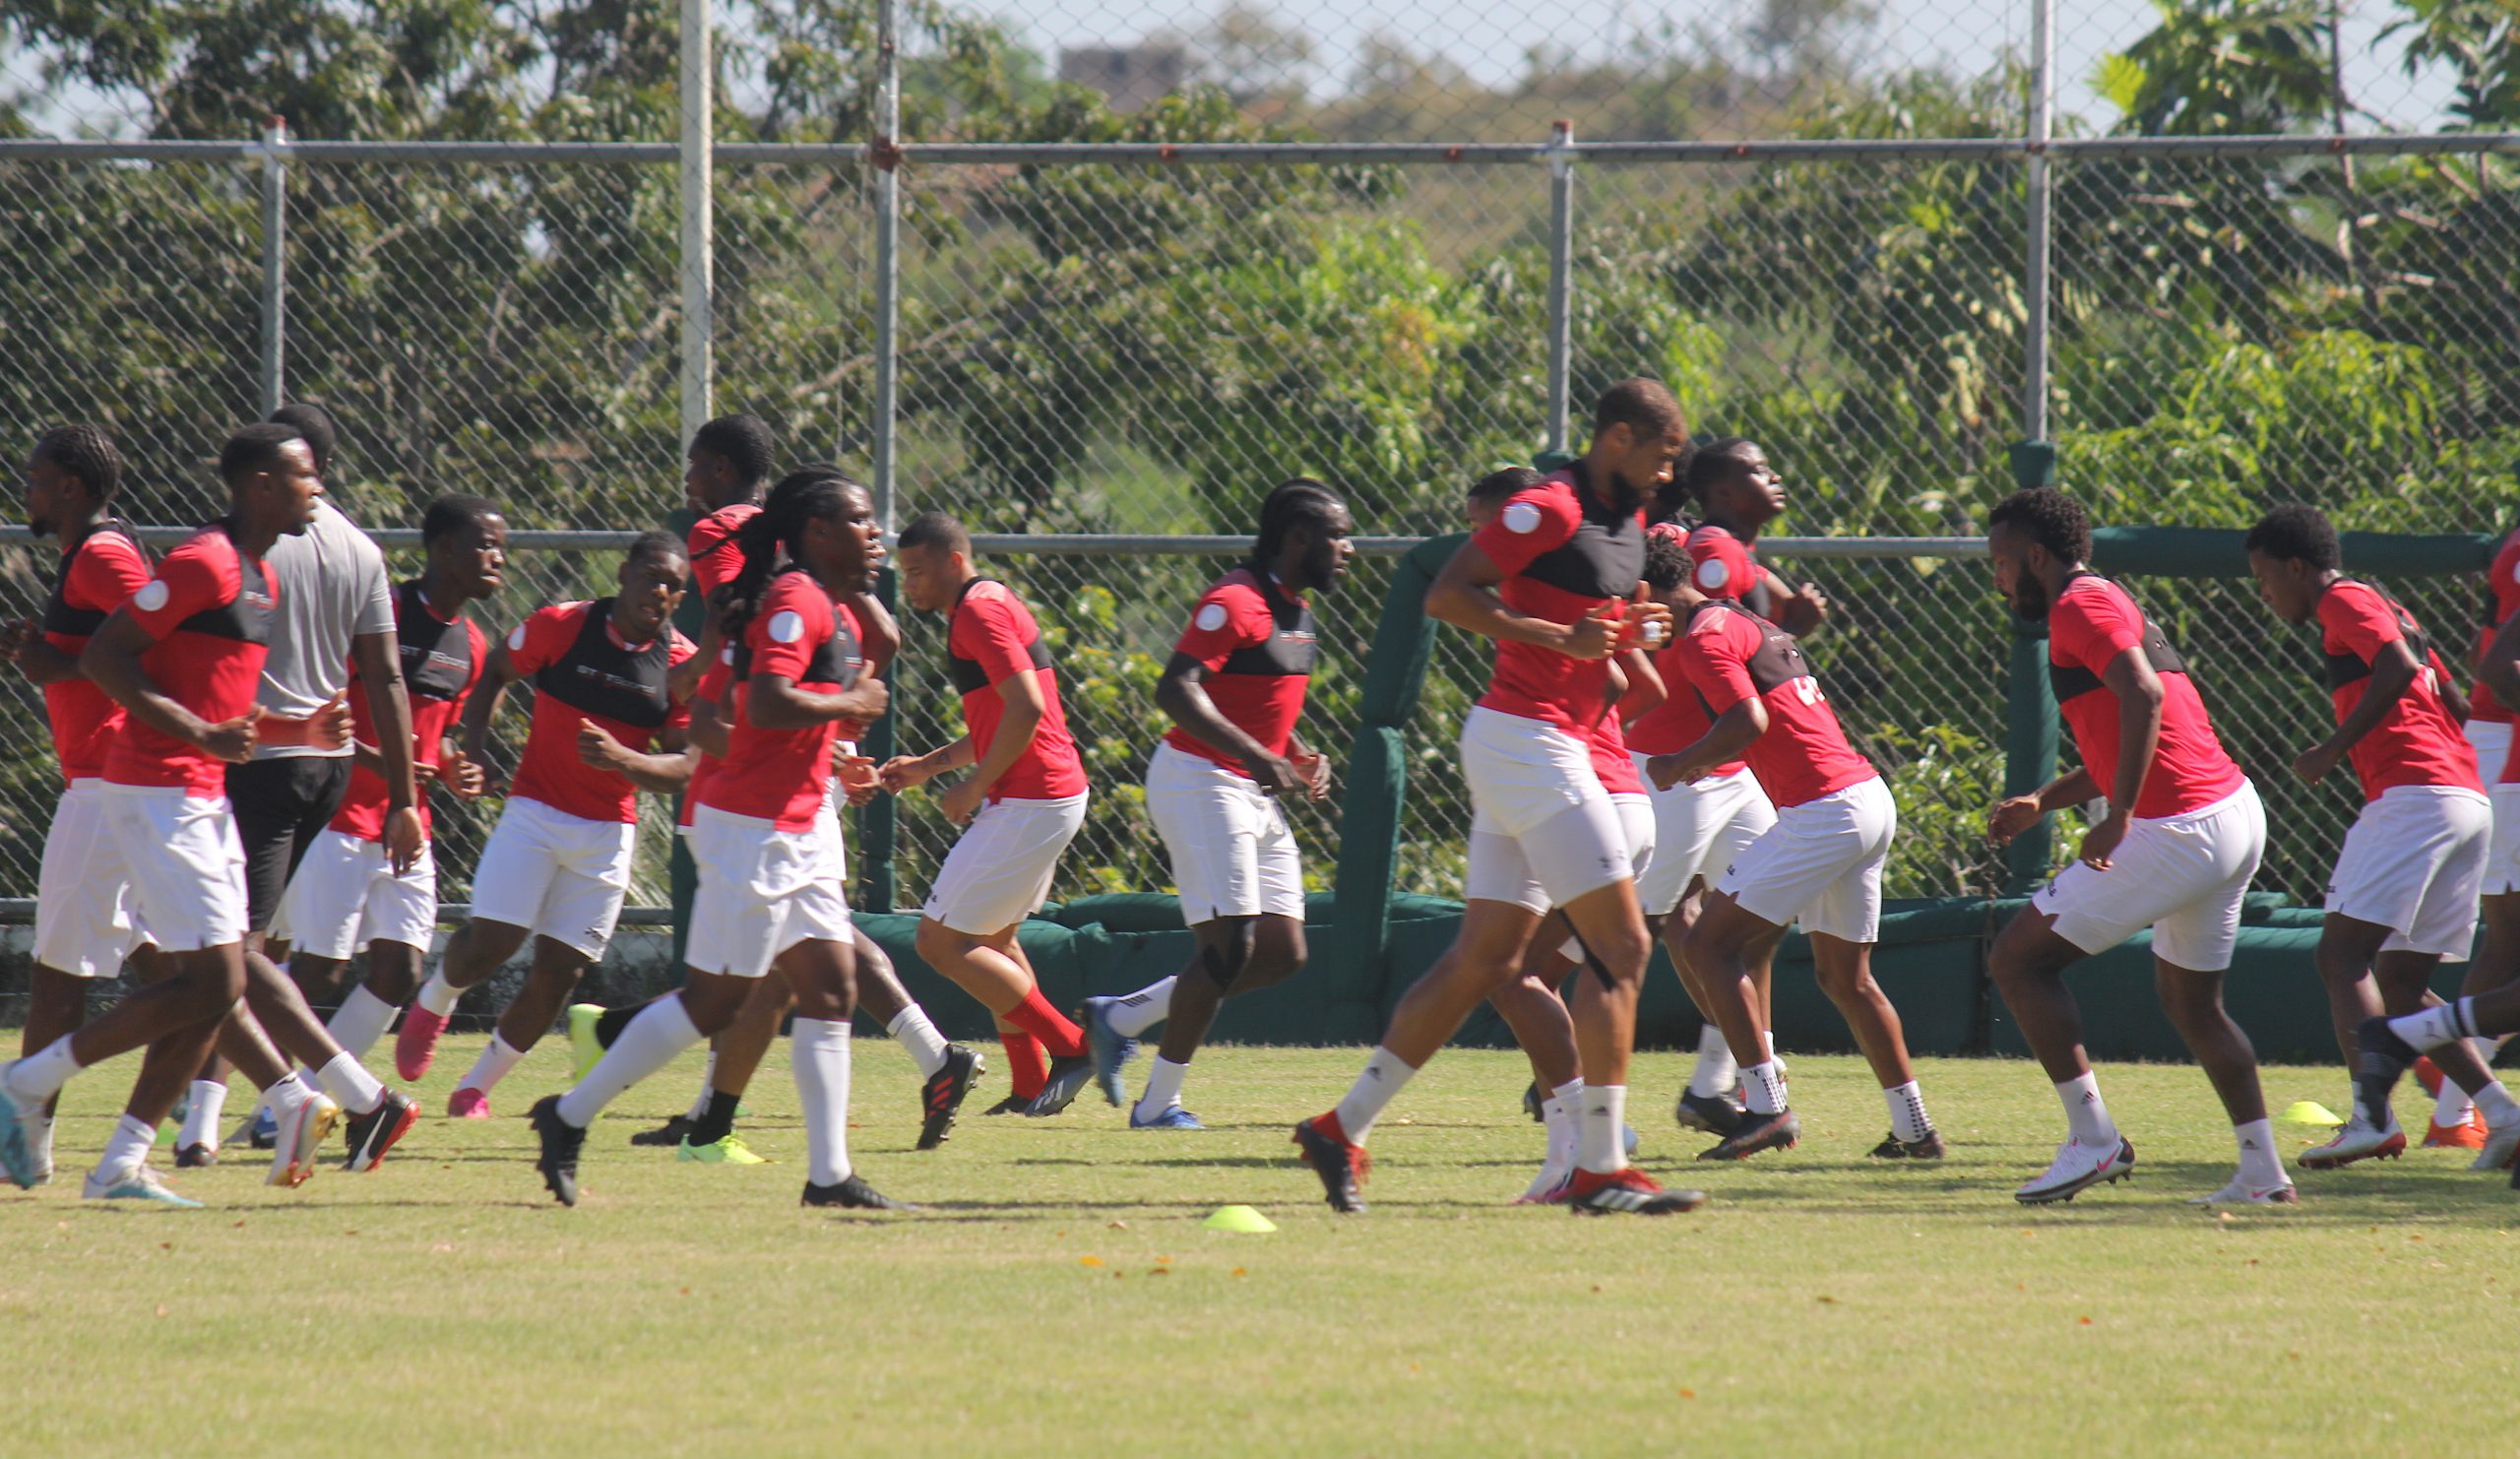 TT Men’s Football team in high spirits and ready for World Cup qualifier